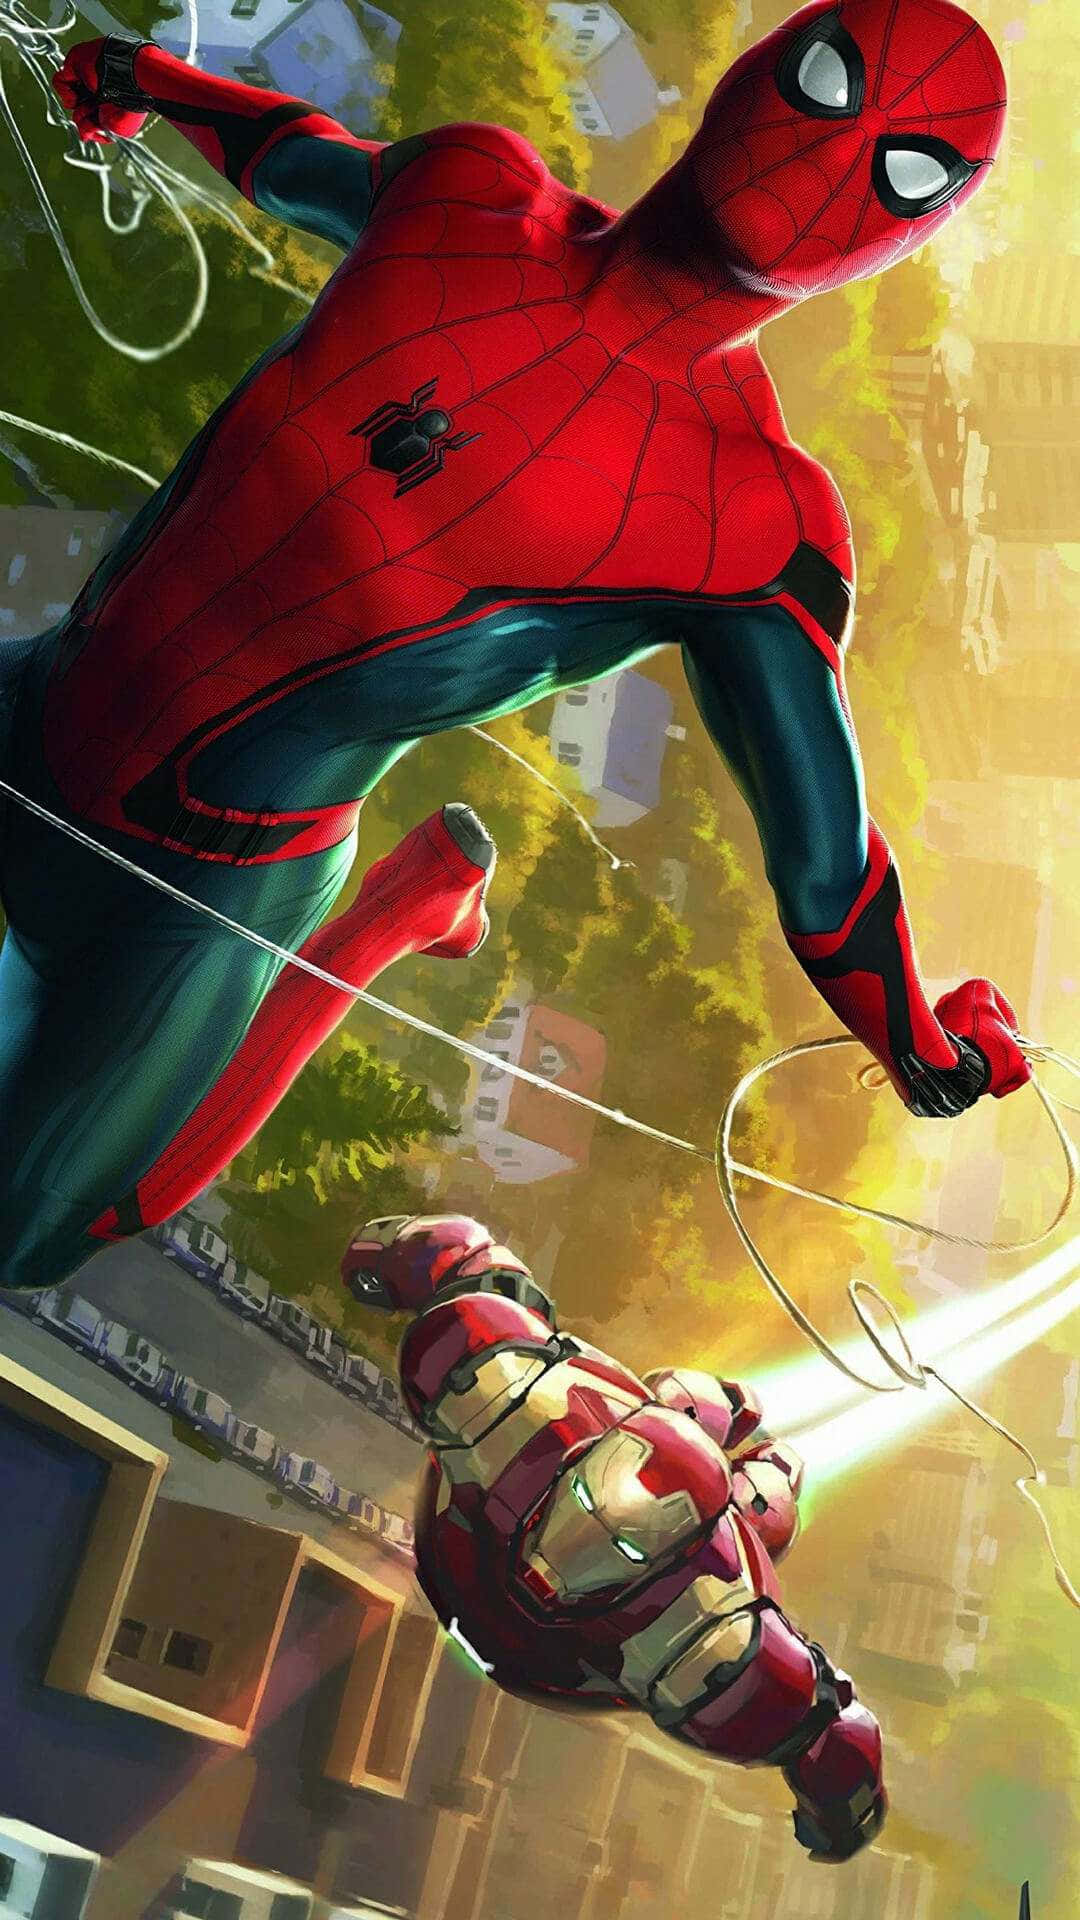 Marvel's Dynamic Duo - Iron Man and Spider-Man Wallpaper